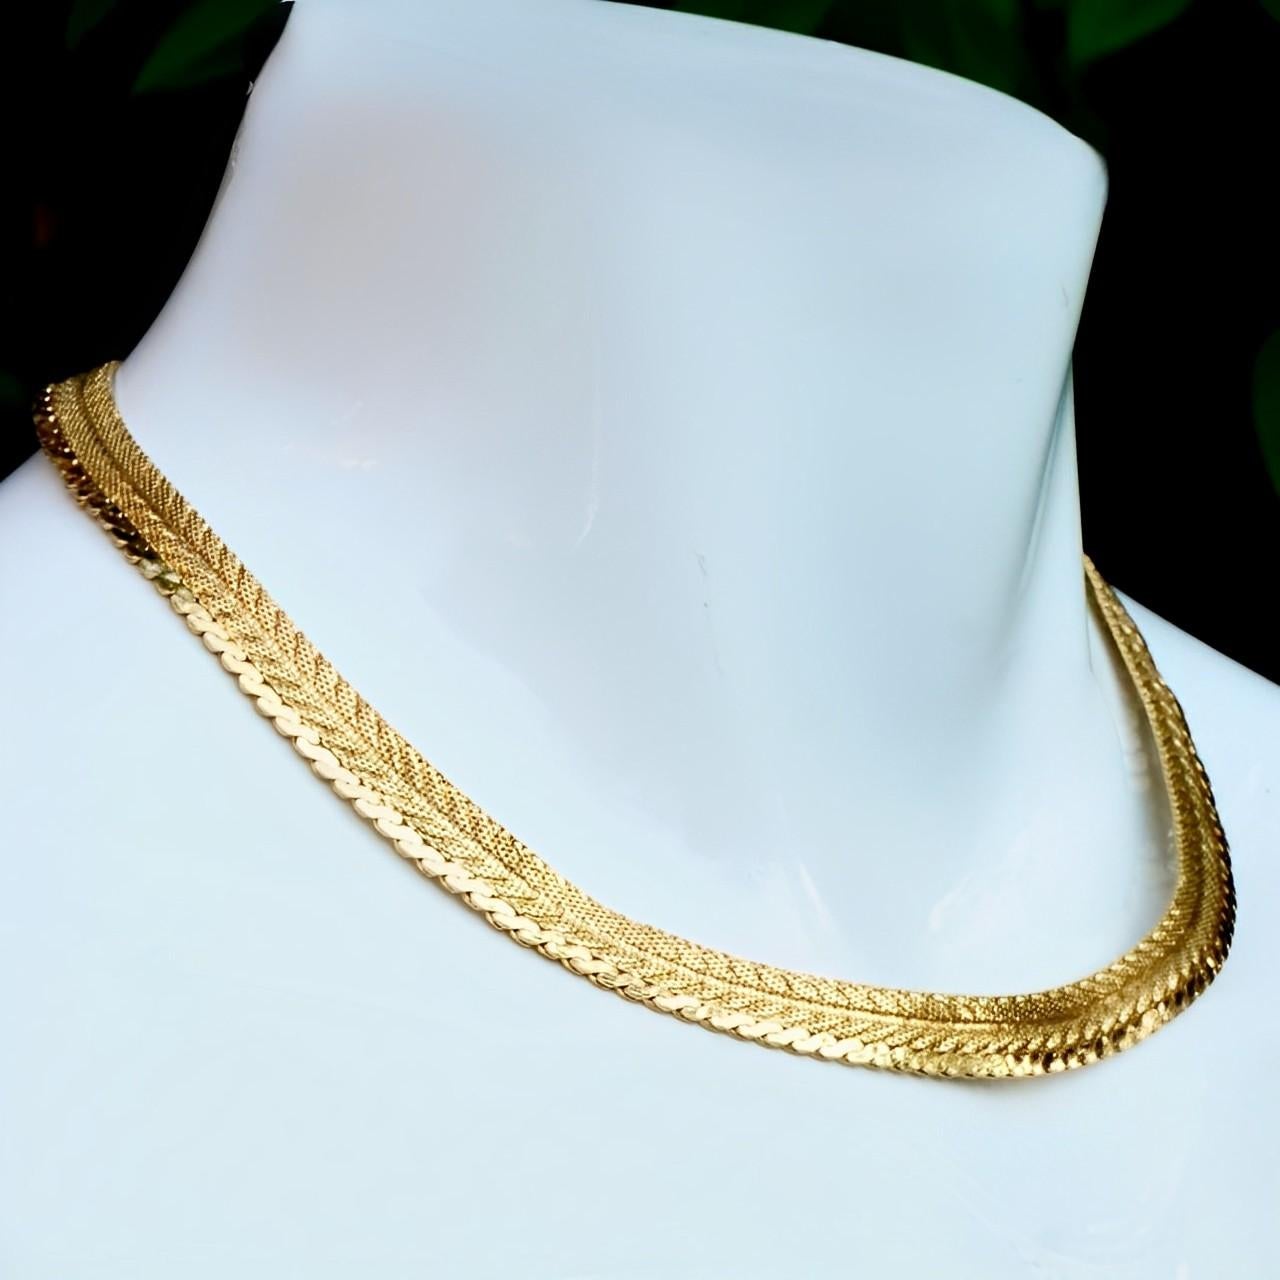 Egyptian Revival Gold Plated Chevron Mesh and Shiny Serpentine Collar Necklace circa 1980s For Sale